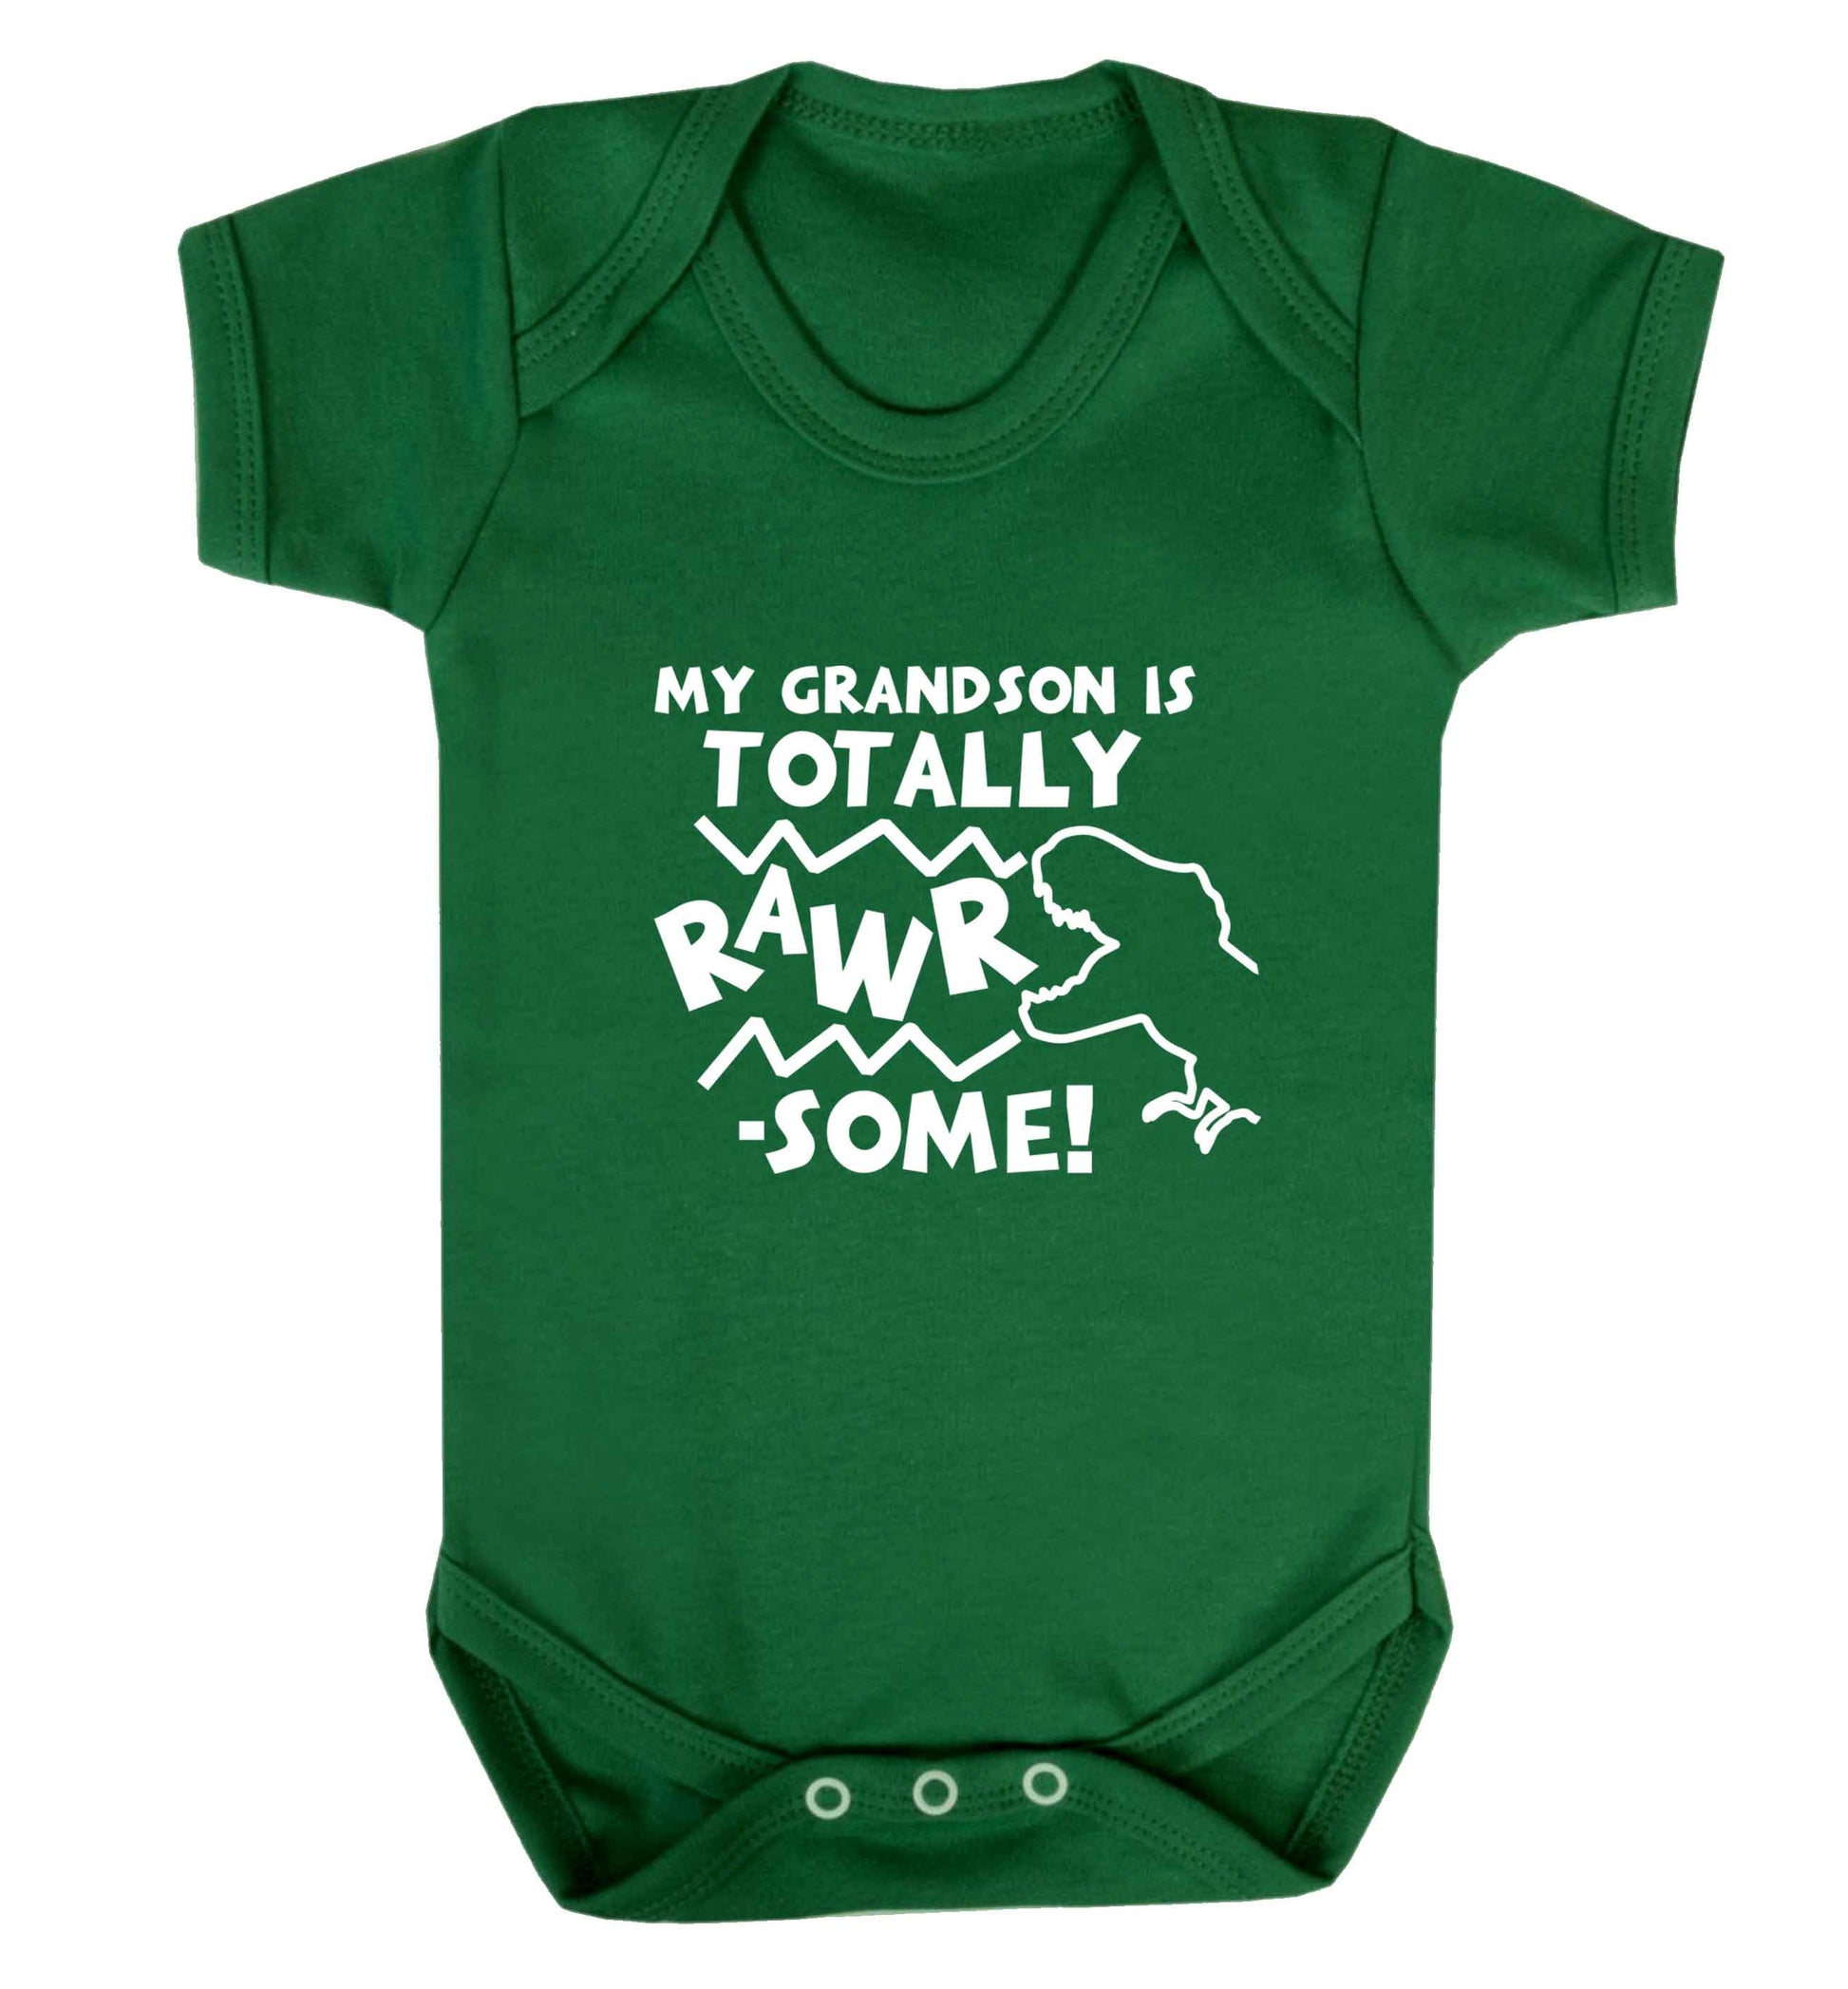 My grandson is totally rawrsome baby vest green 18-24 months